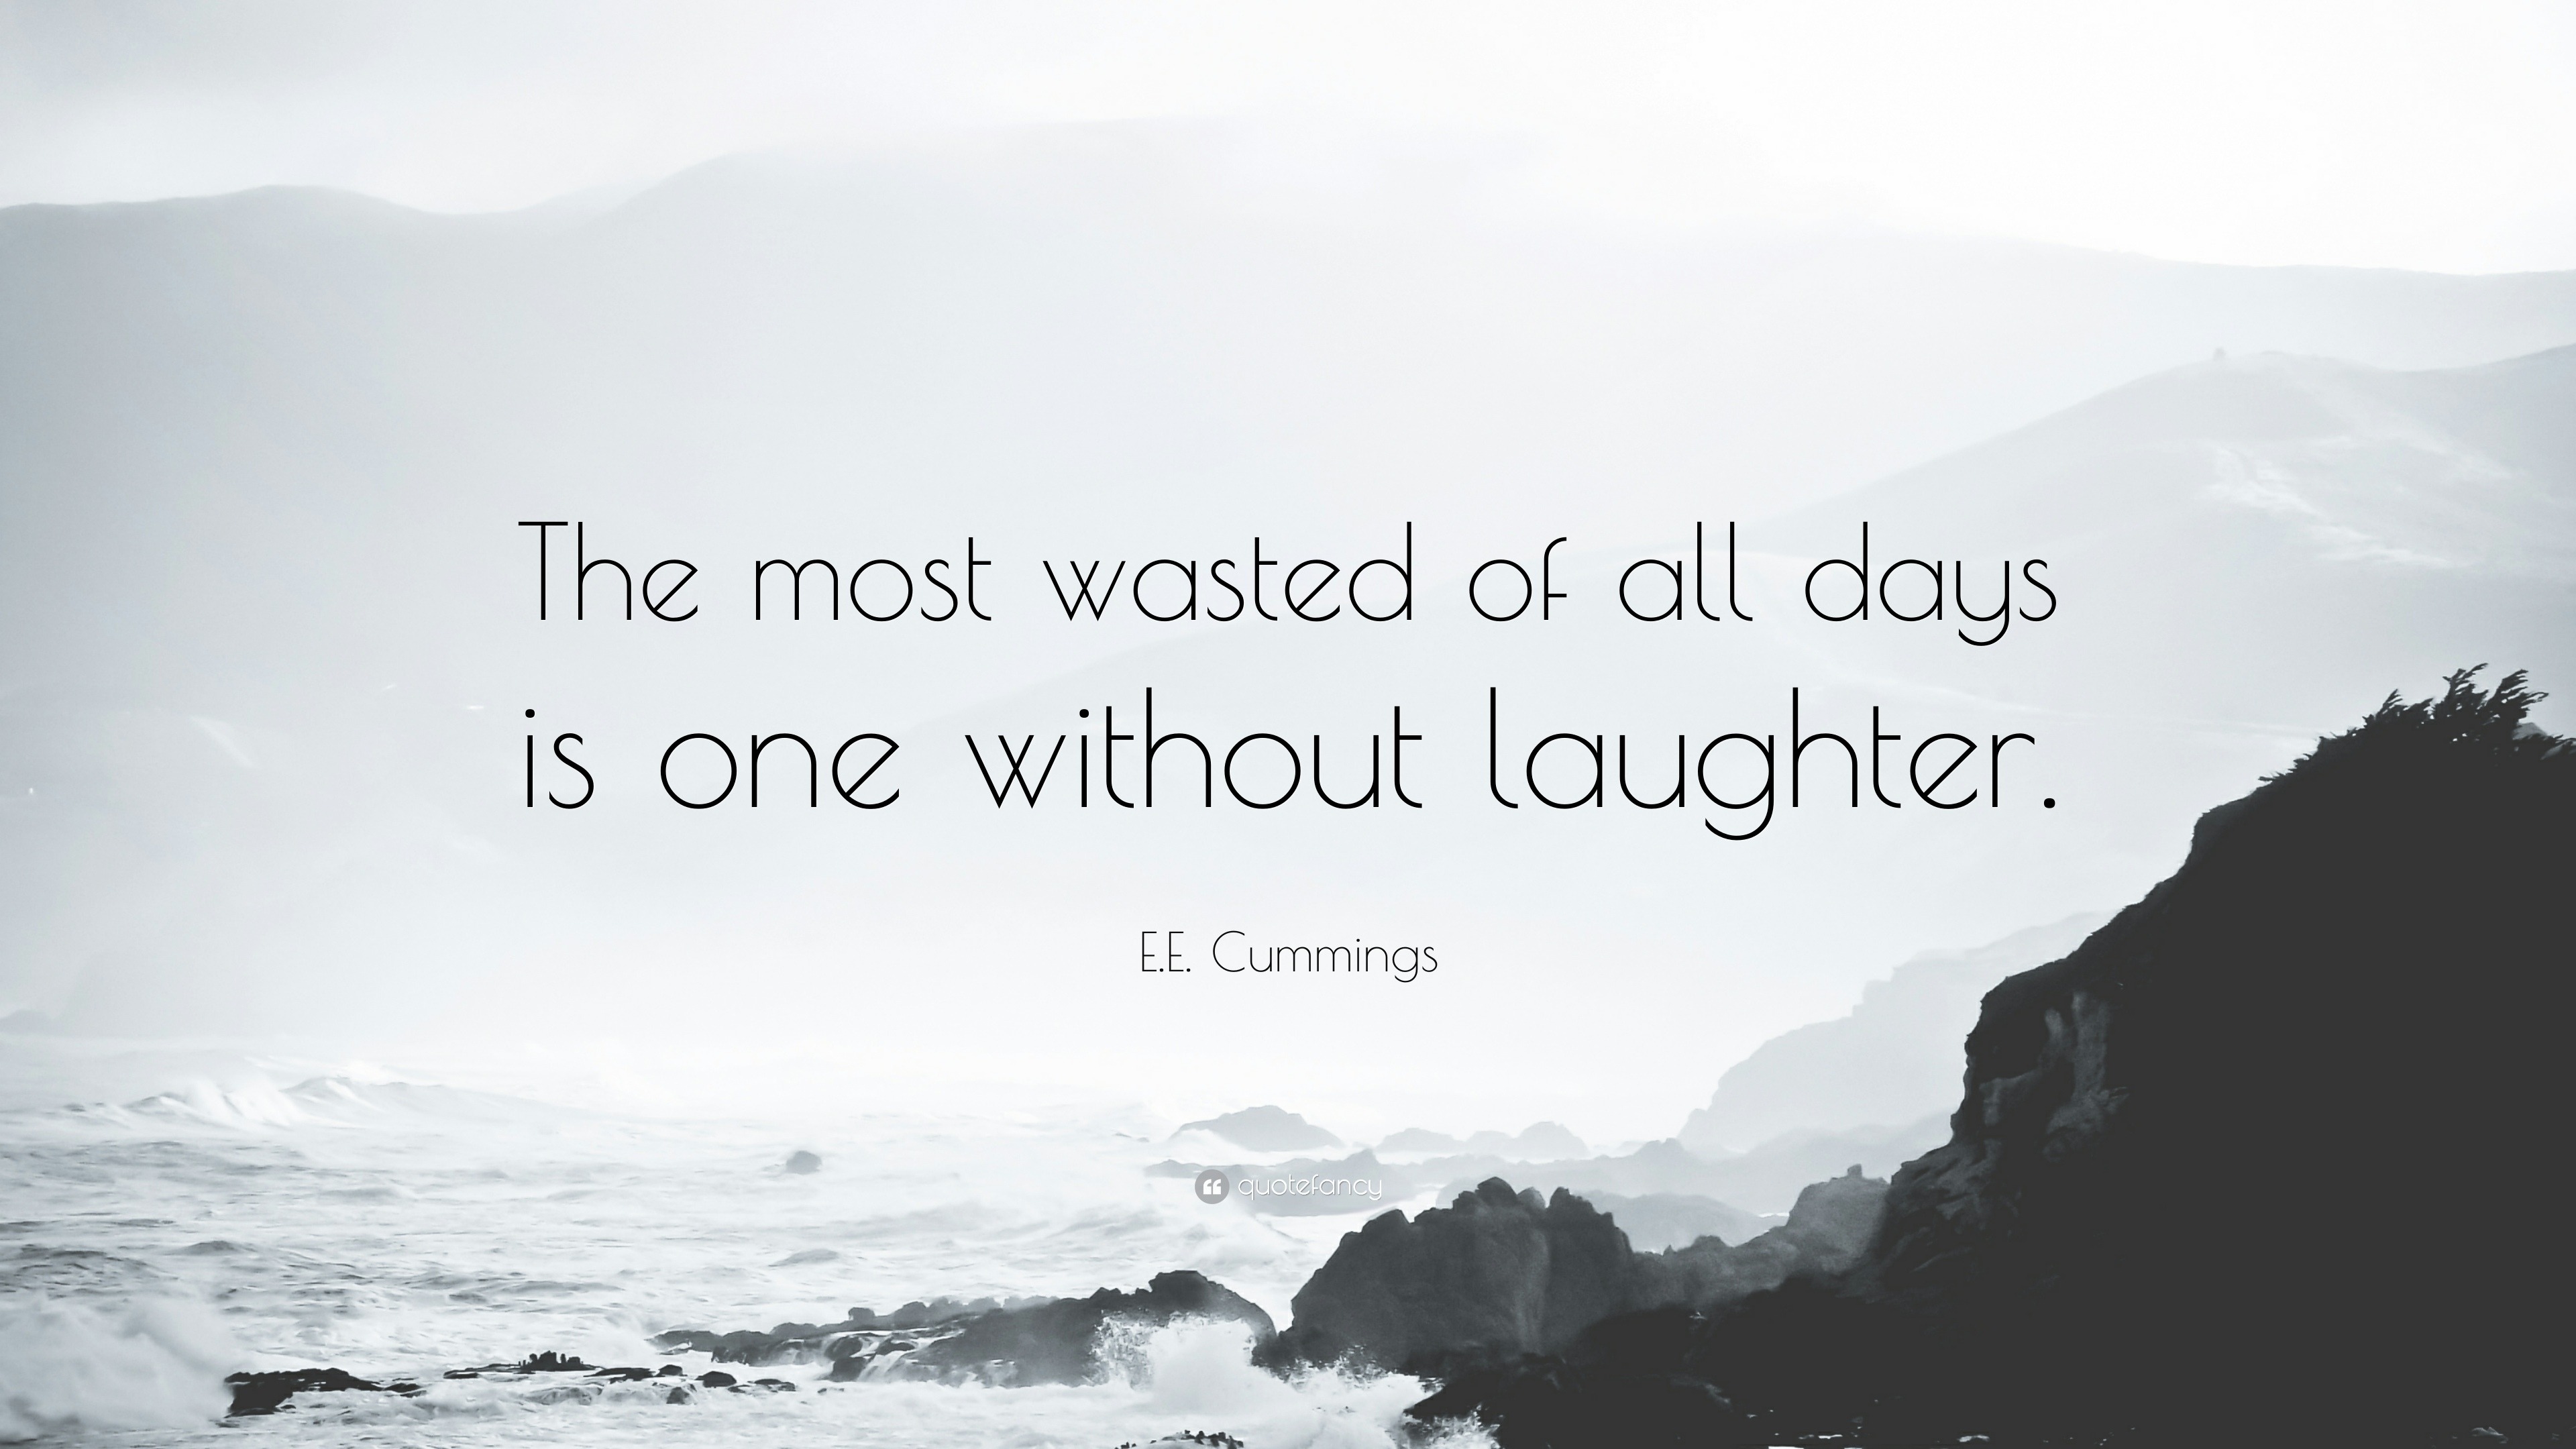 E.E. Cummings Quote: “The most wasted of all days is one without laughter.” (12 ...3840 x 2160